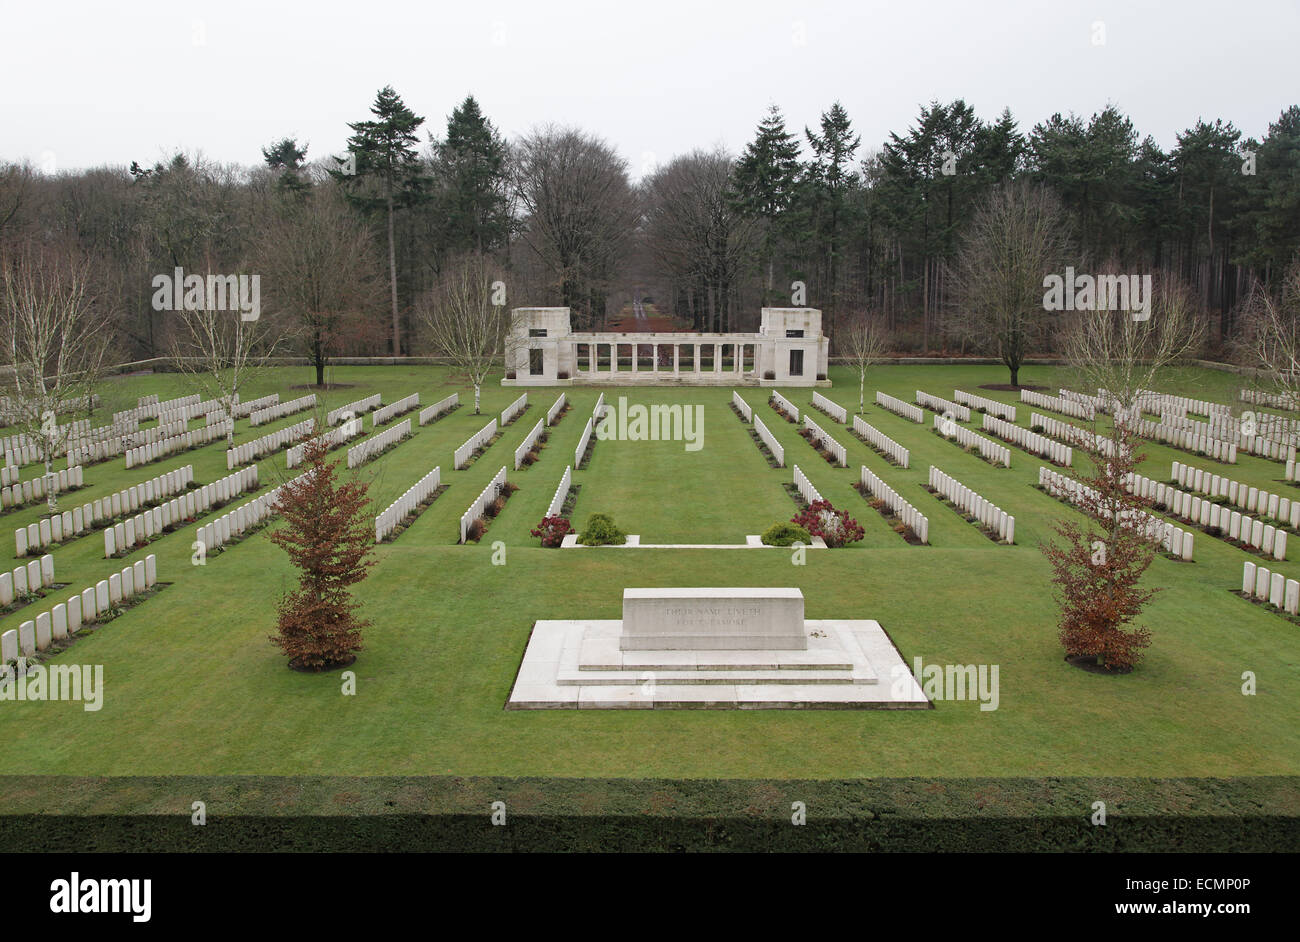 First World War memorial and Cemetery for the 5th Australian Division.Zonnebeke Belgium.In Remembrance. Stock Photo